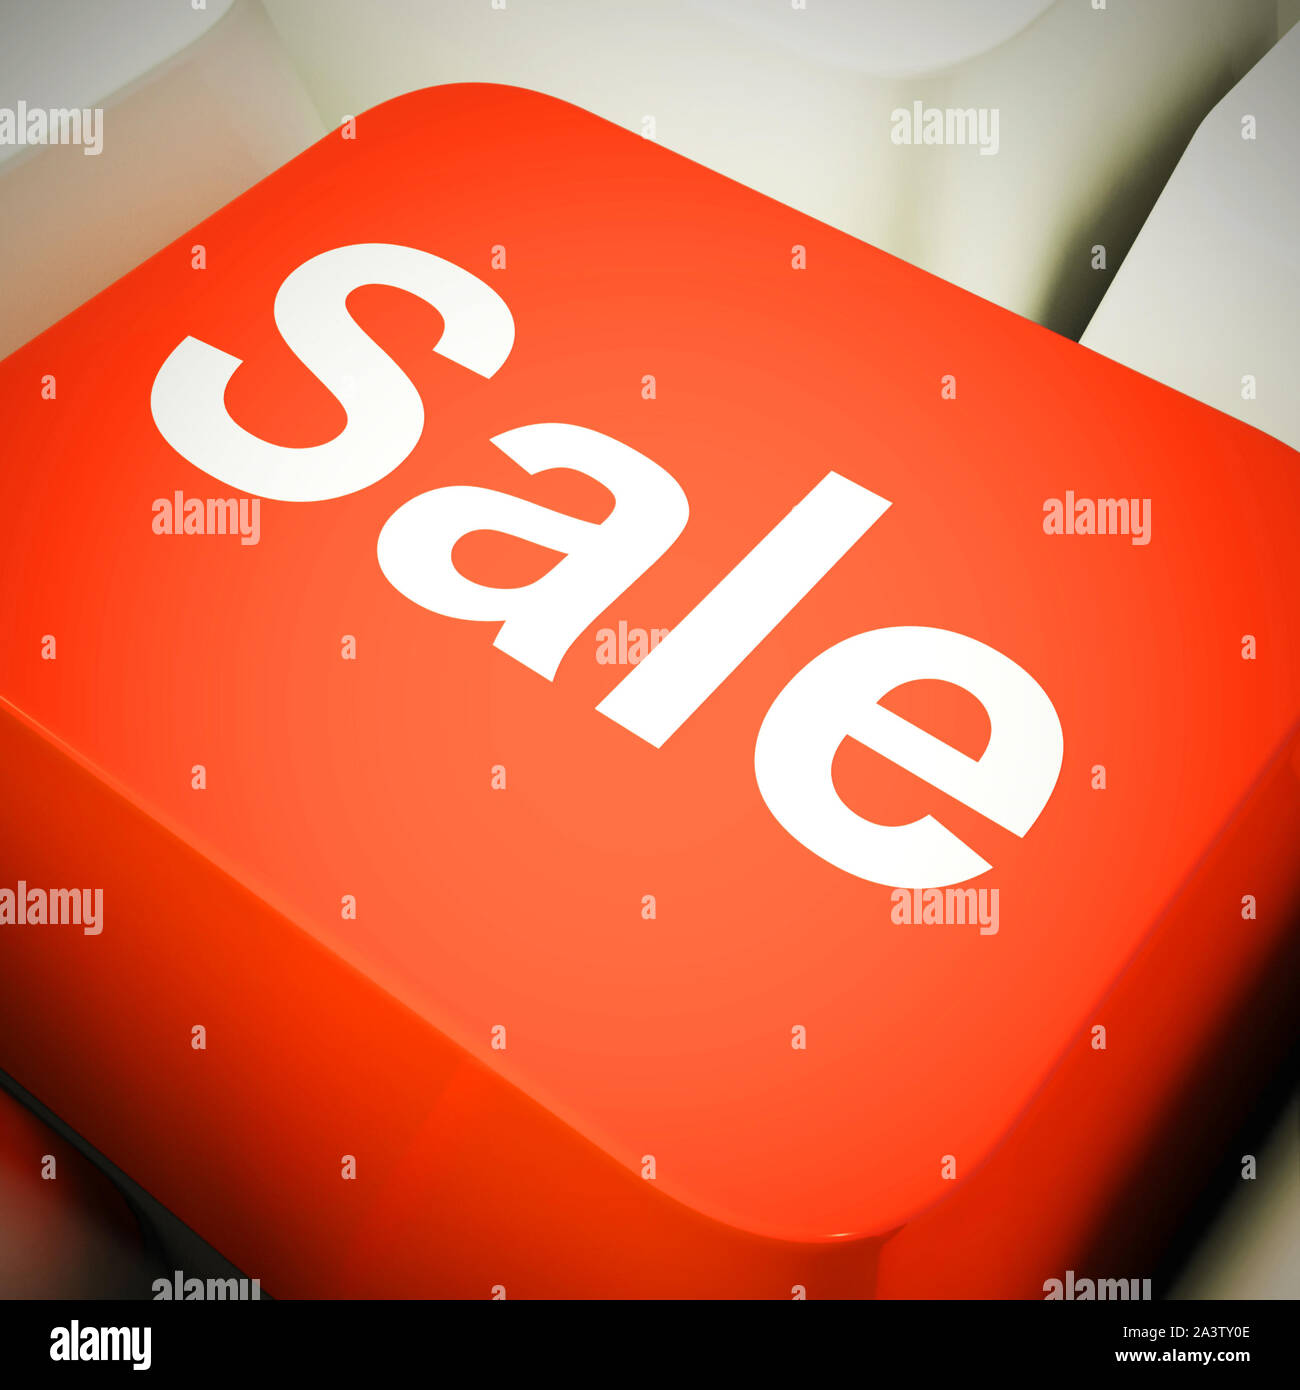 Sale discounts concept icon means best prices and bargains. A reduction in cost or marked down price - 3d illustration Stock Photo